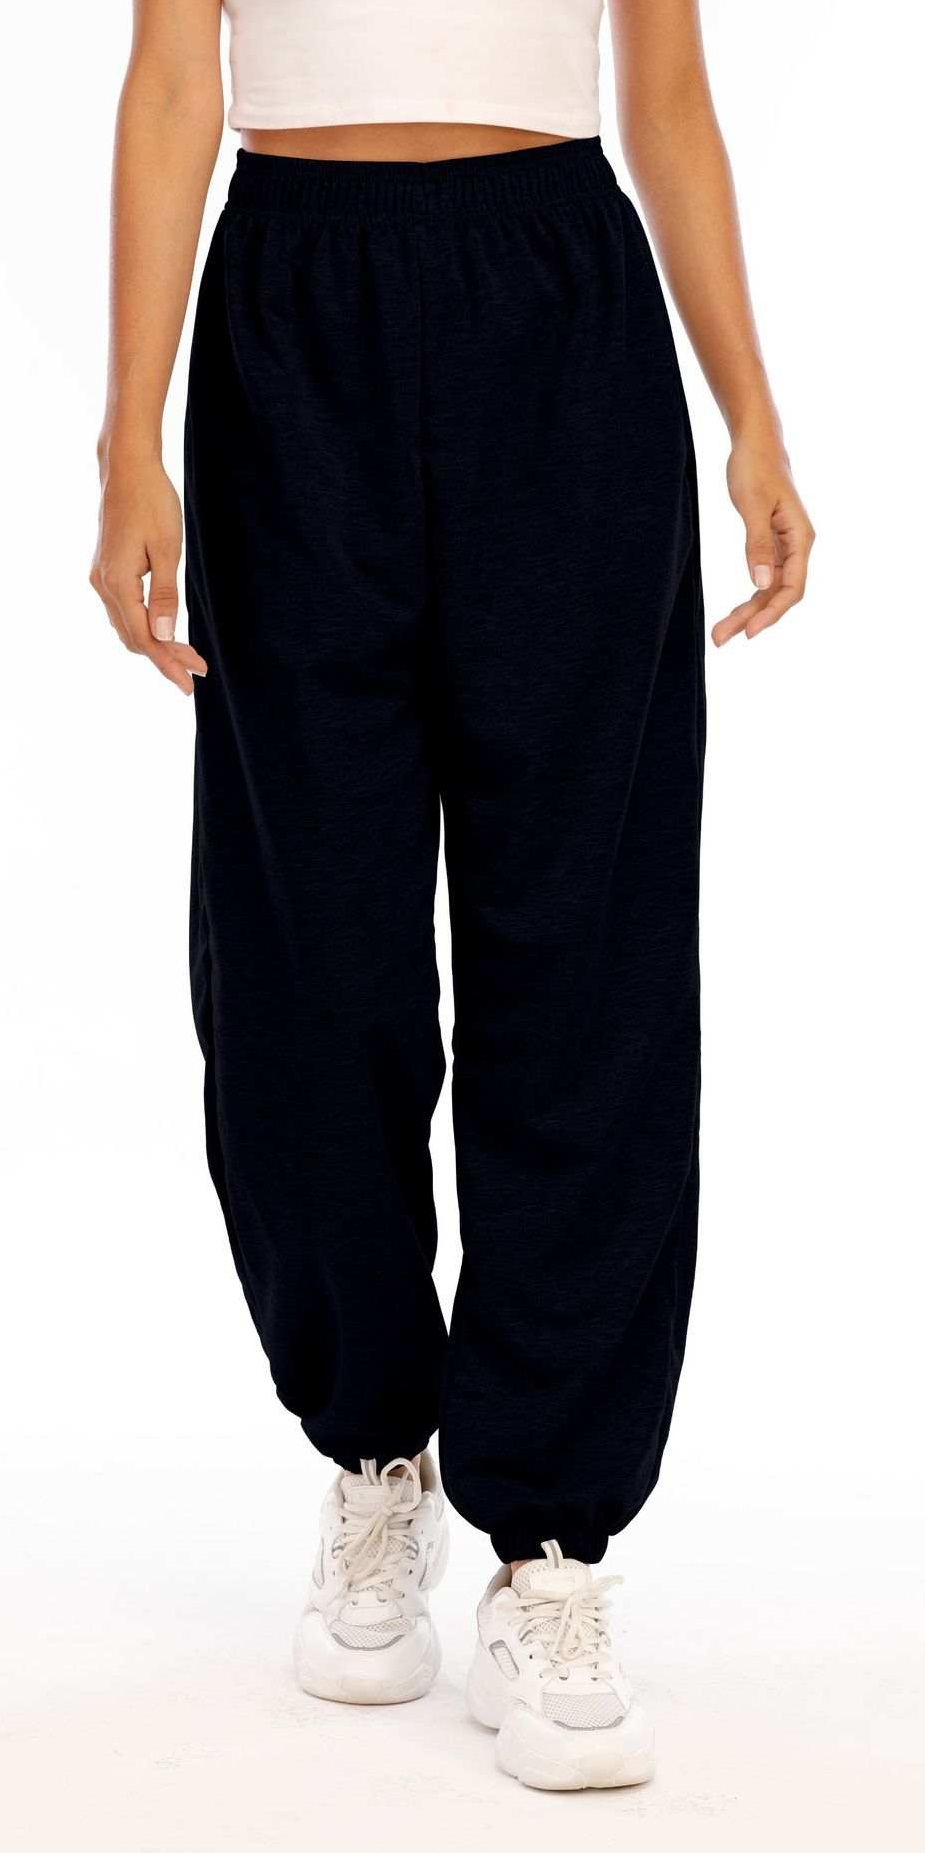 Baggy Sweatpants Joggers for Women Relaxed Fit with pockets Oversized Streetwear - Elastic Waistband - Cuffed Legs